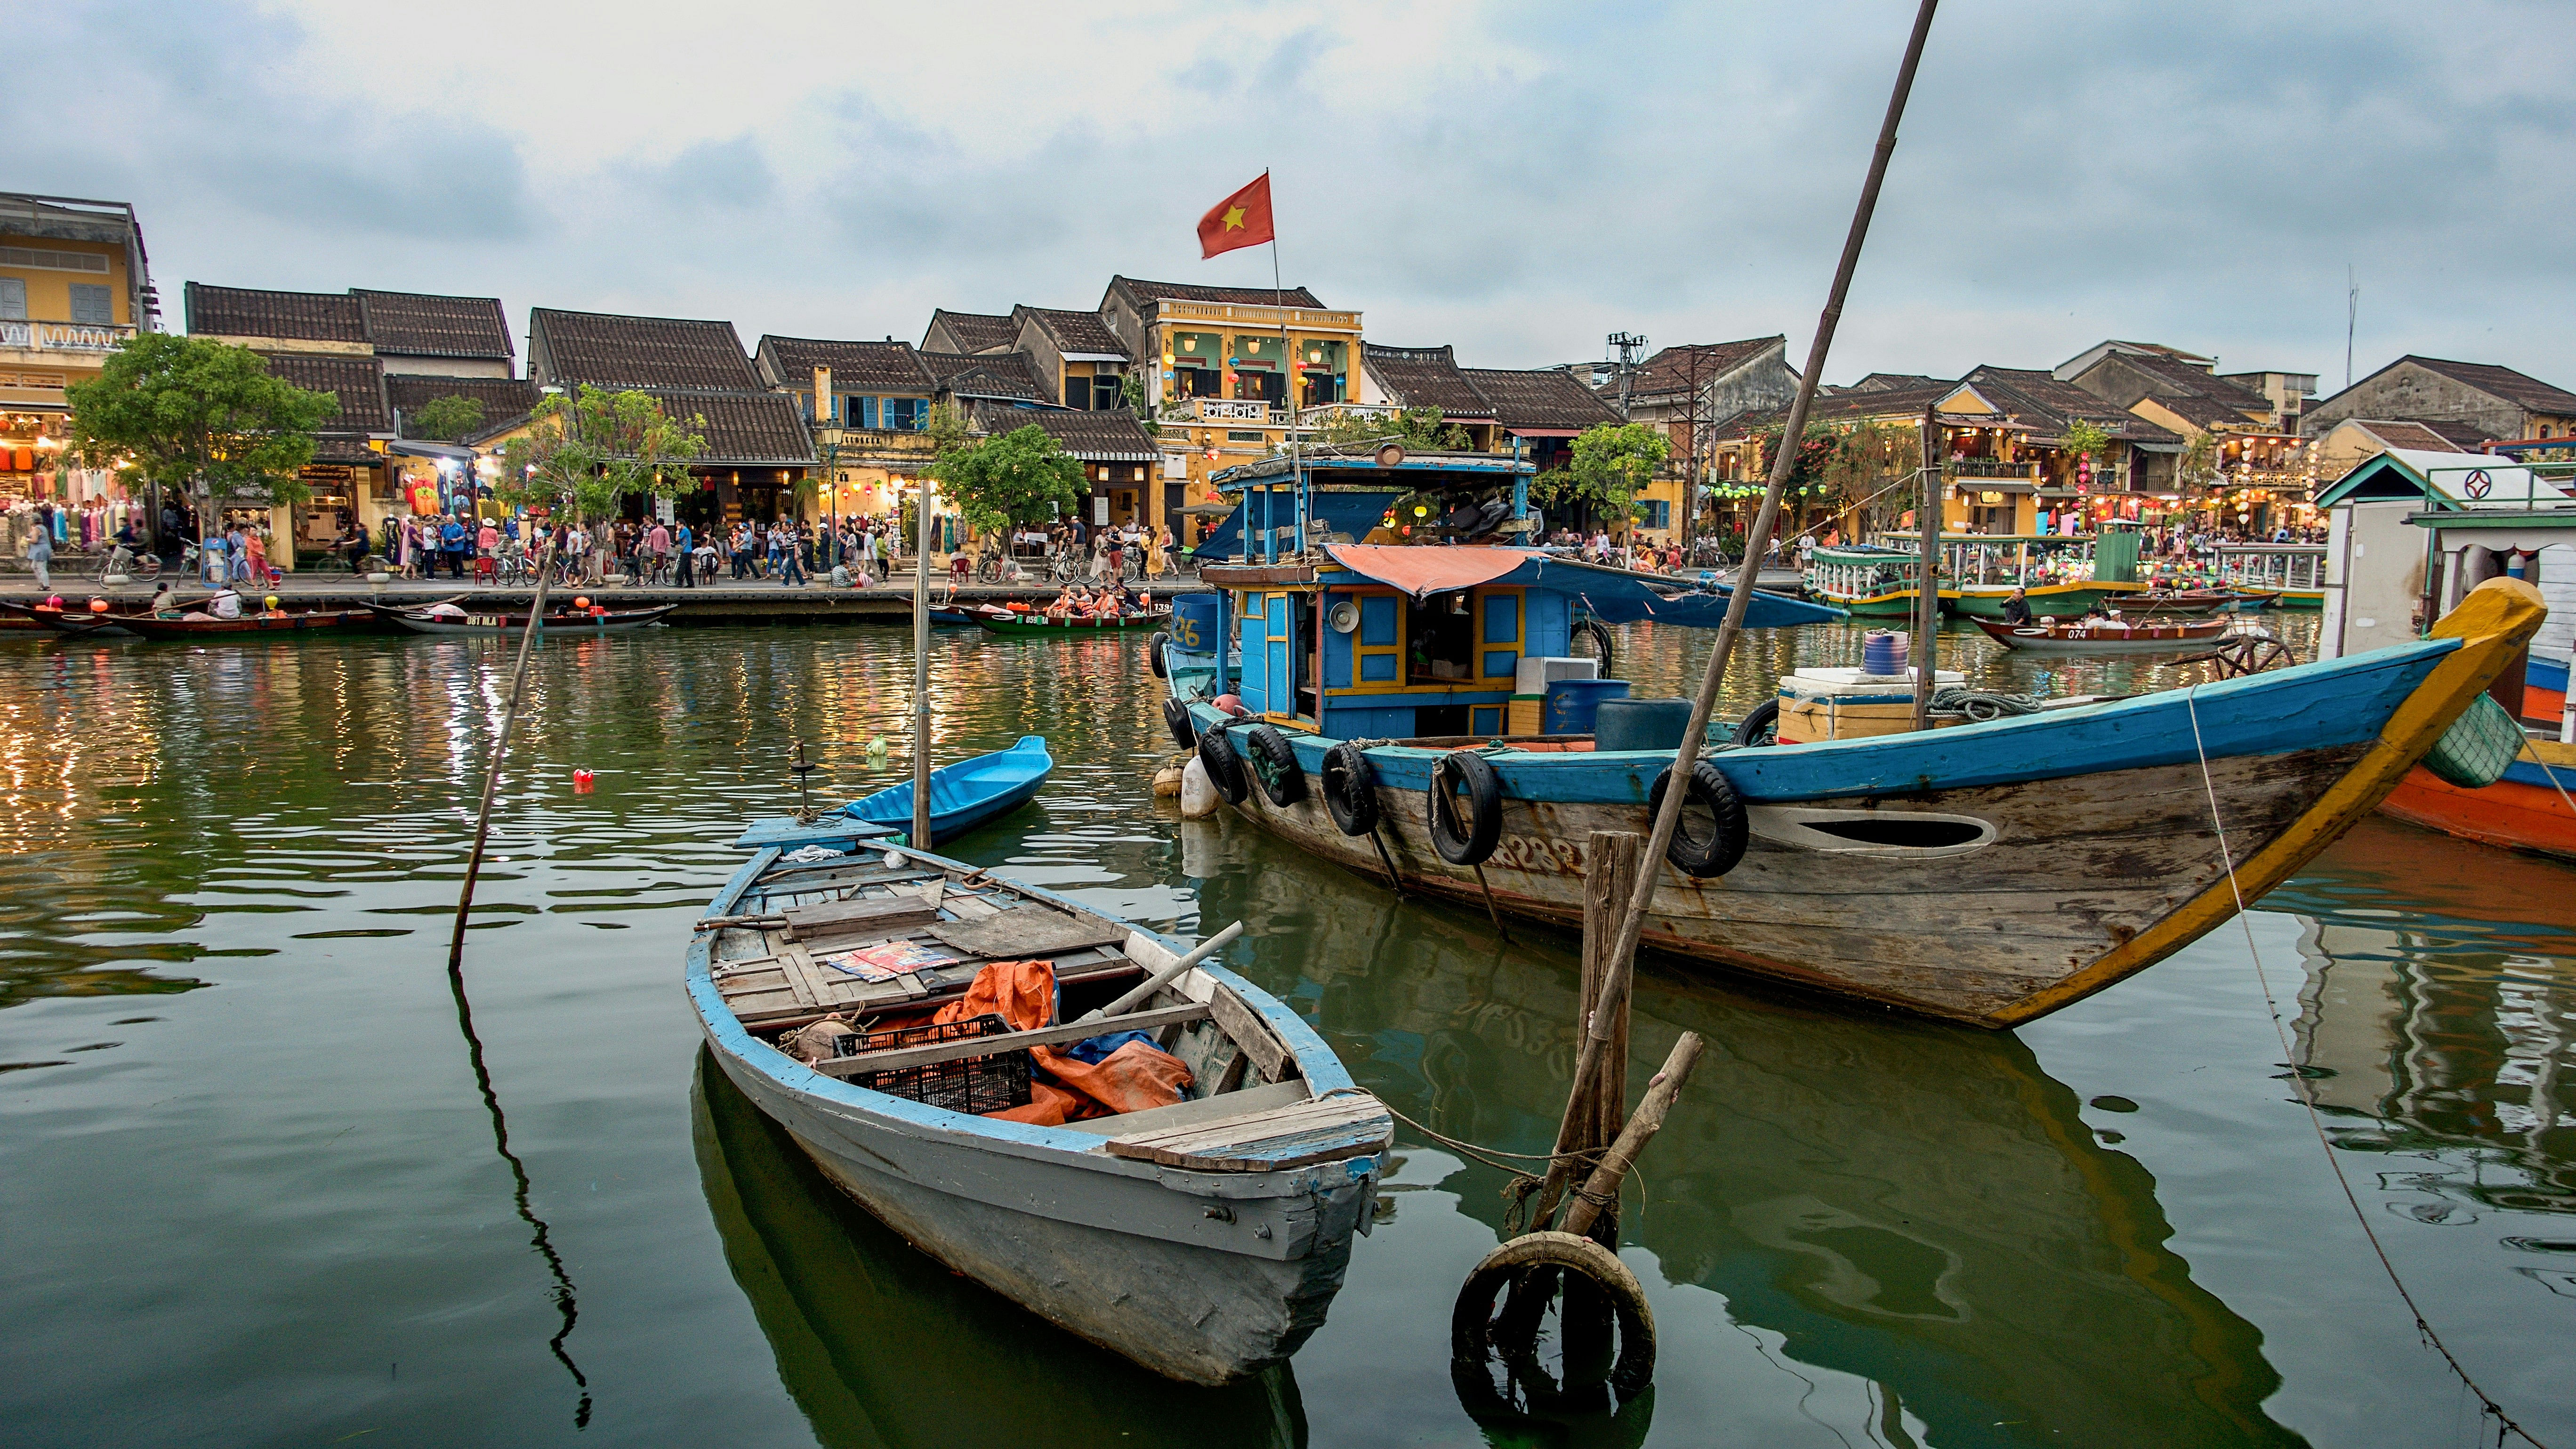 Boats along the river in Hoi An, Vietnam